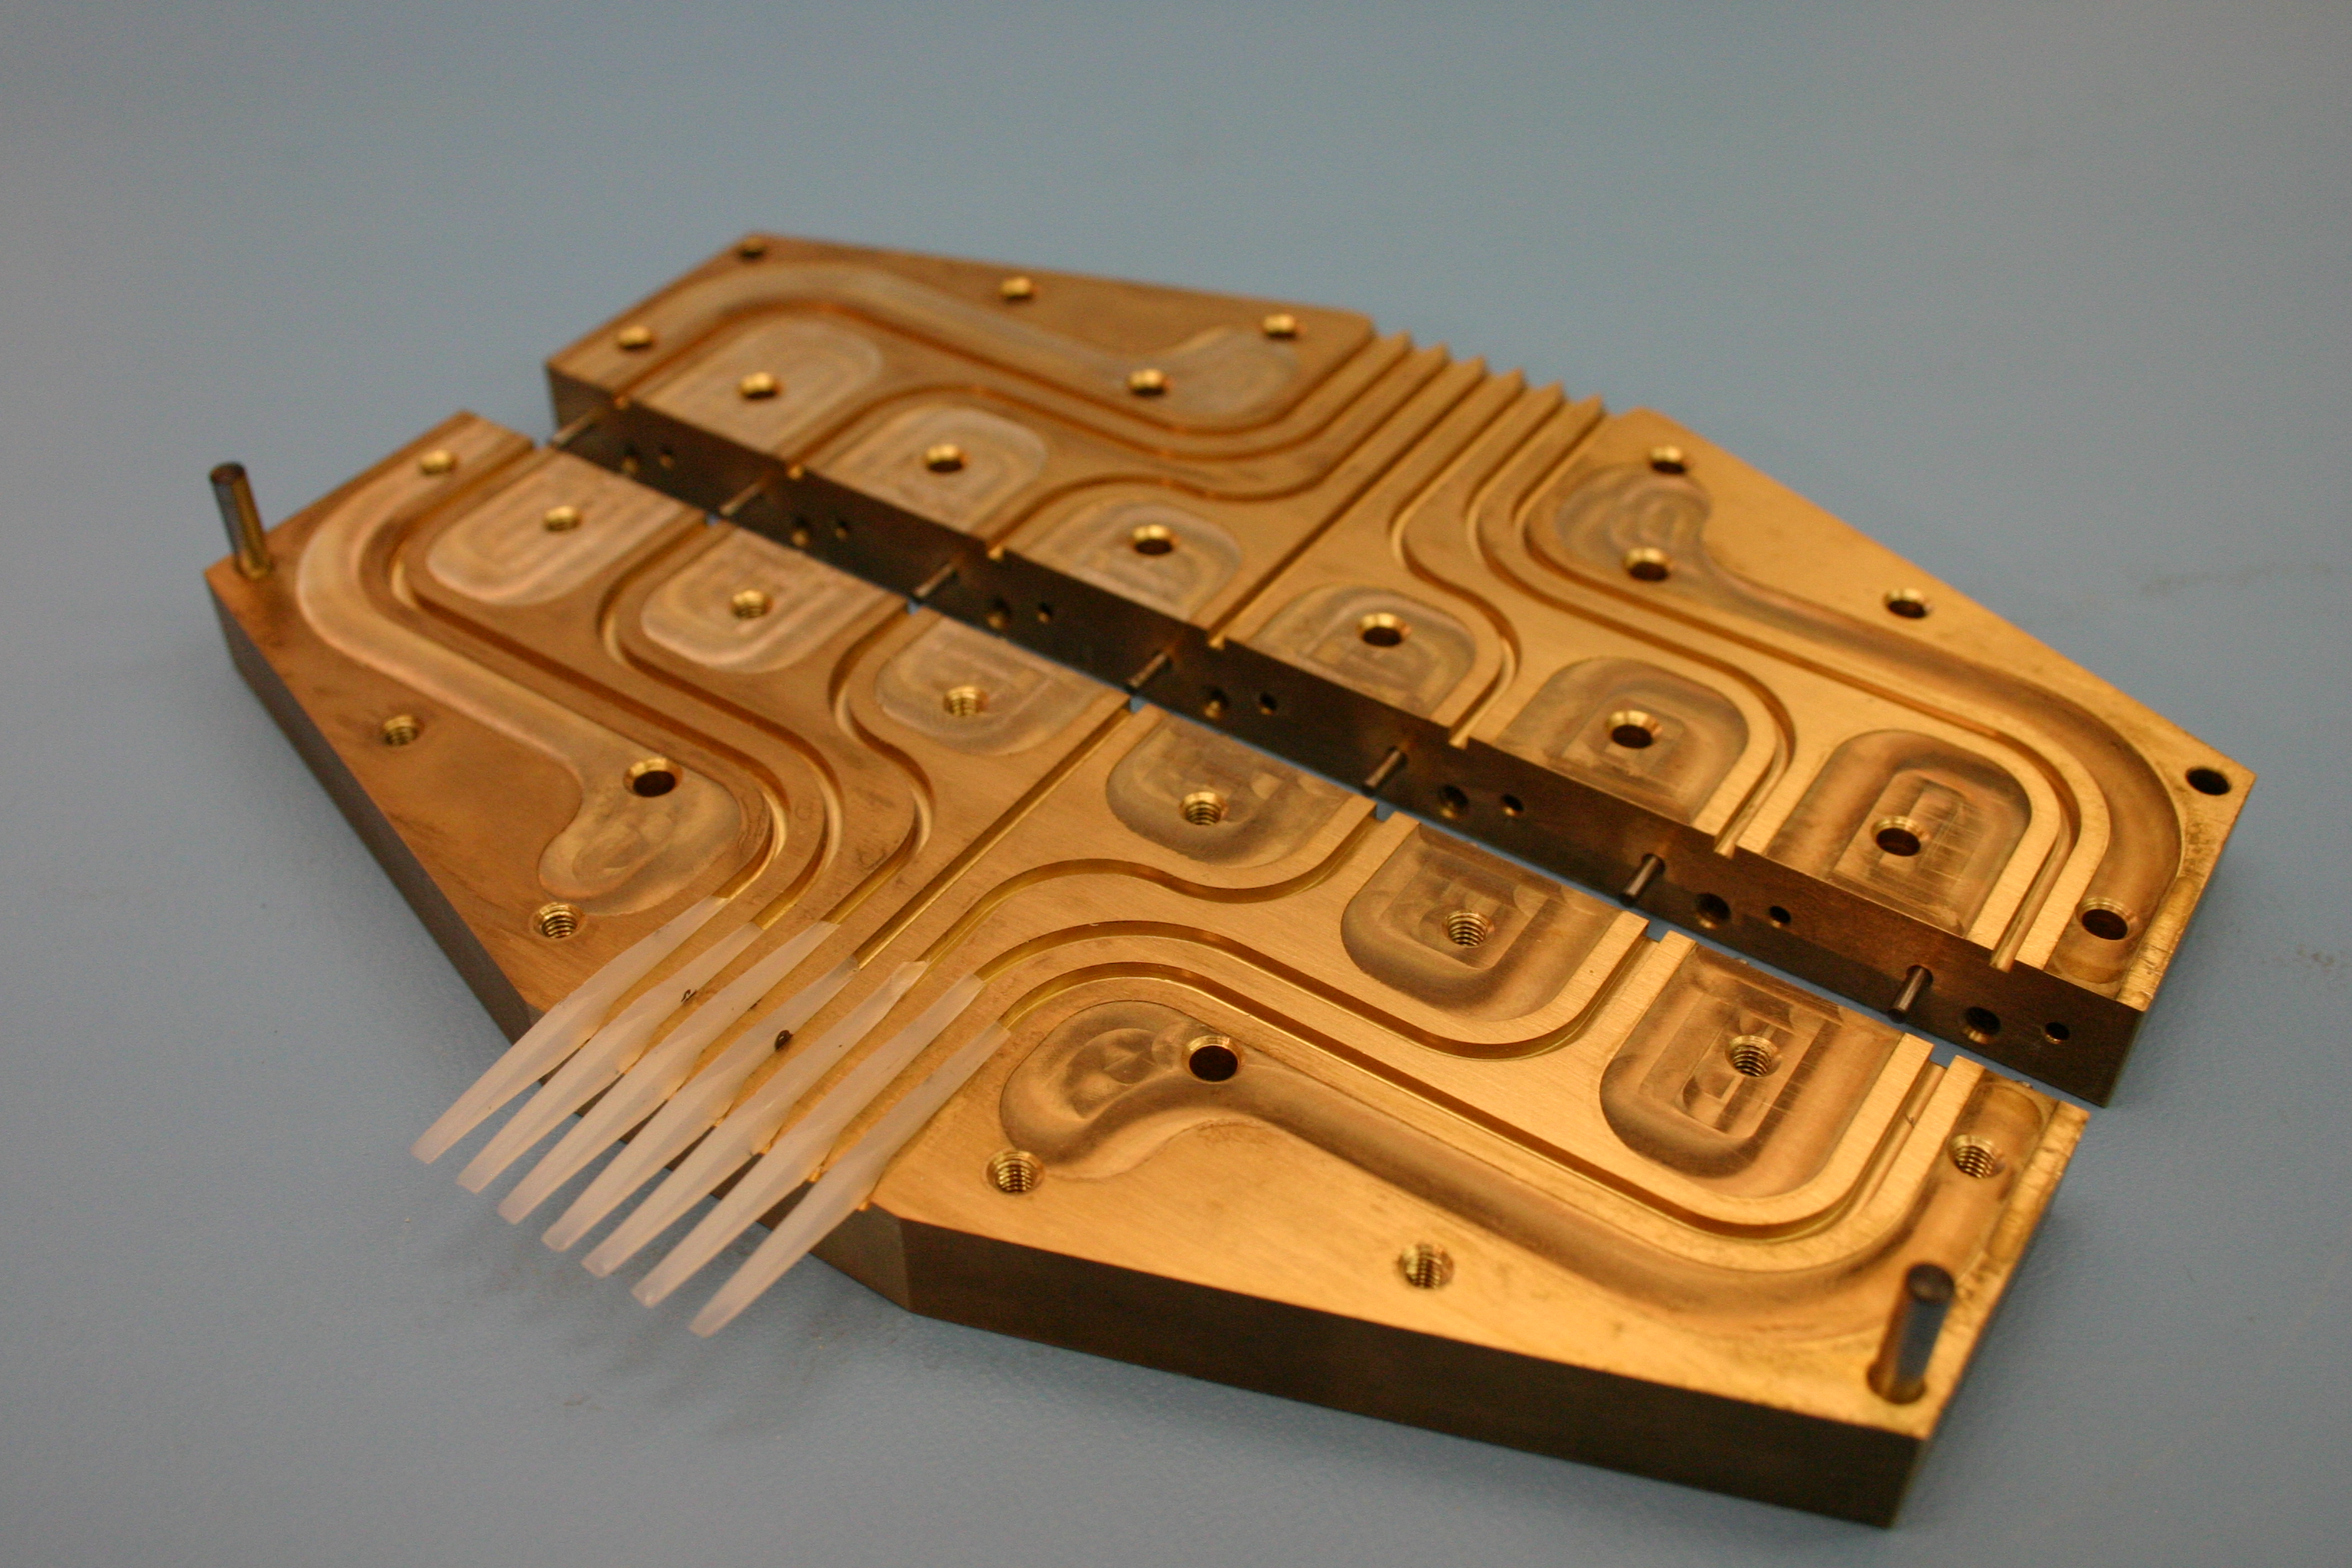 77 GHz dielectric rod antenna array with waveguide based feeding network.